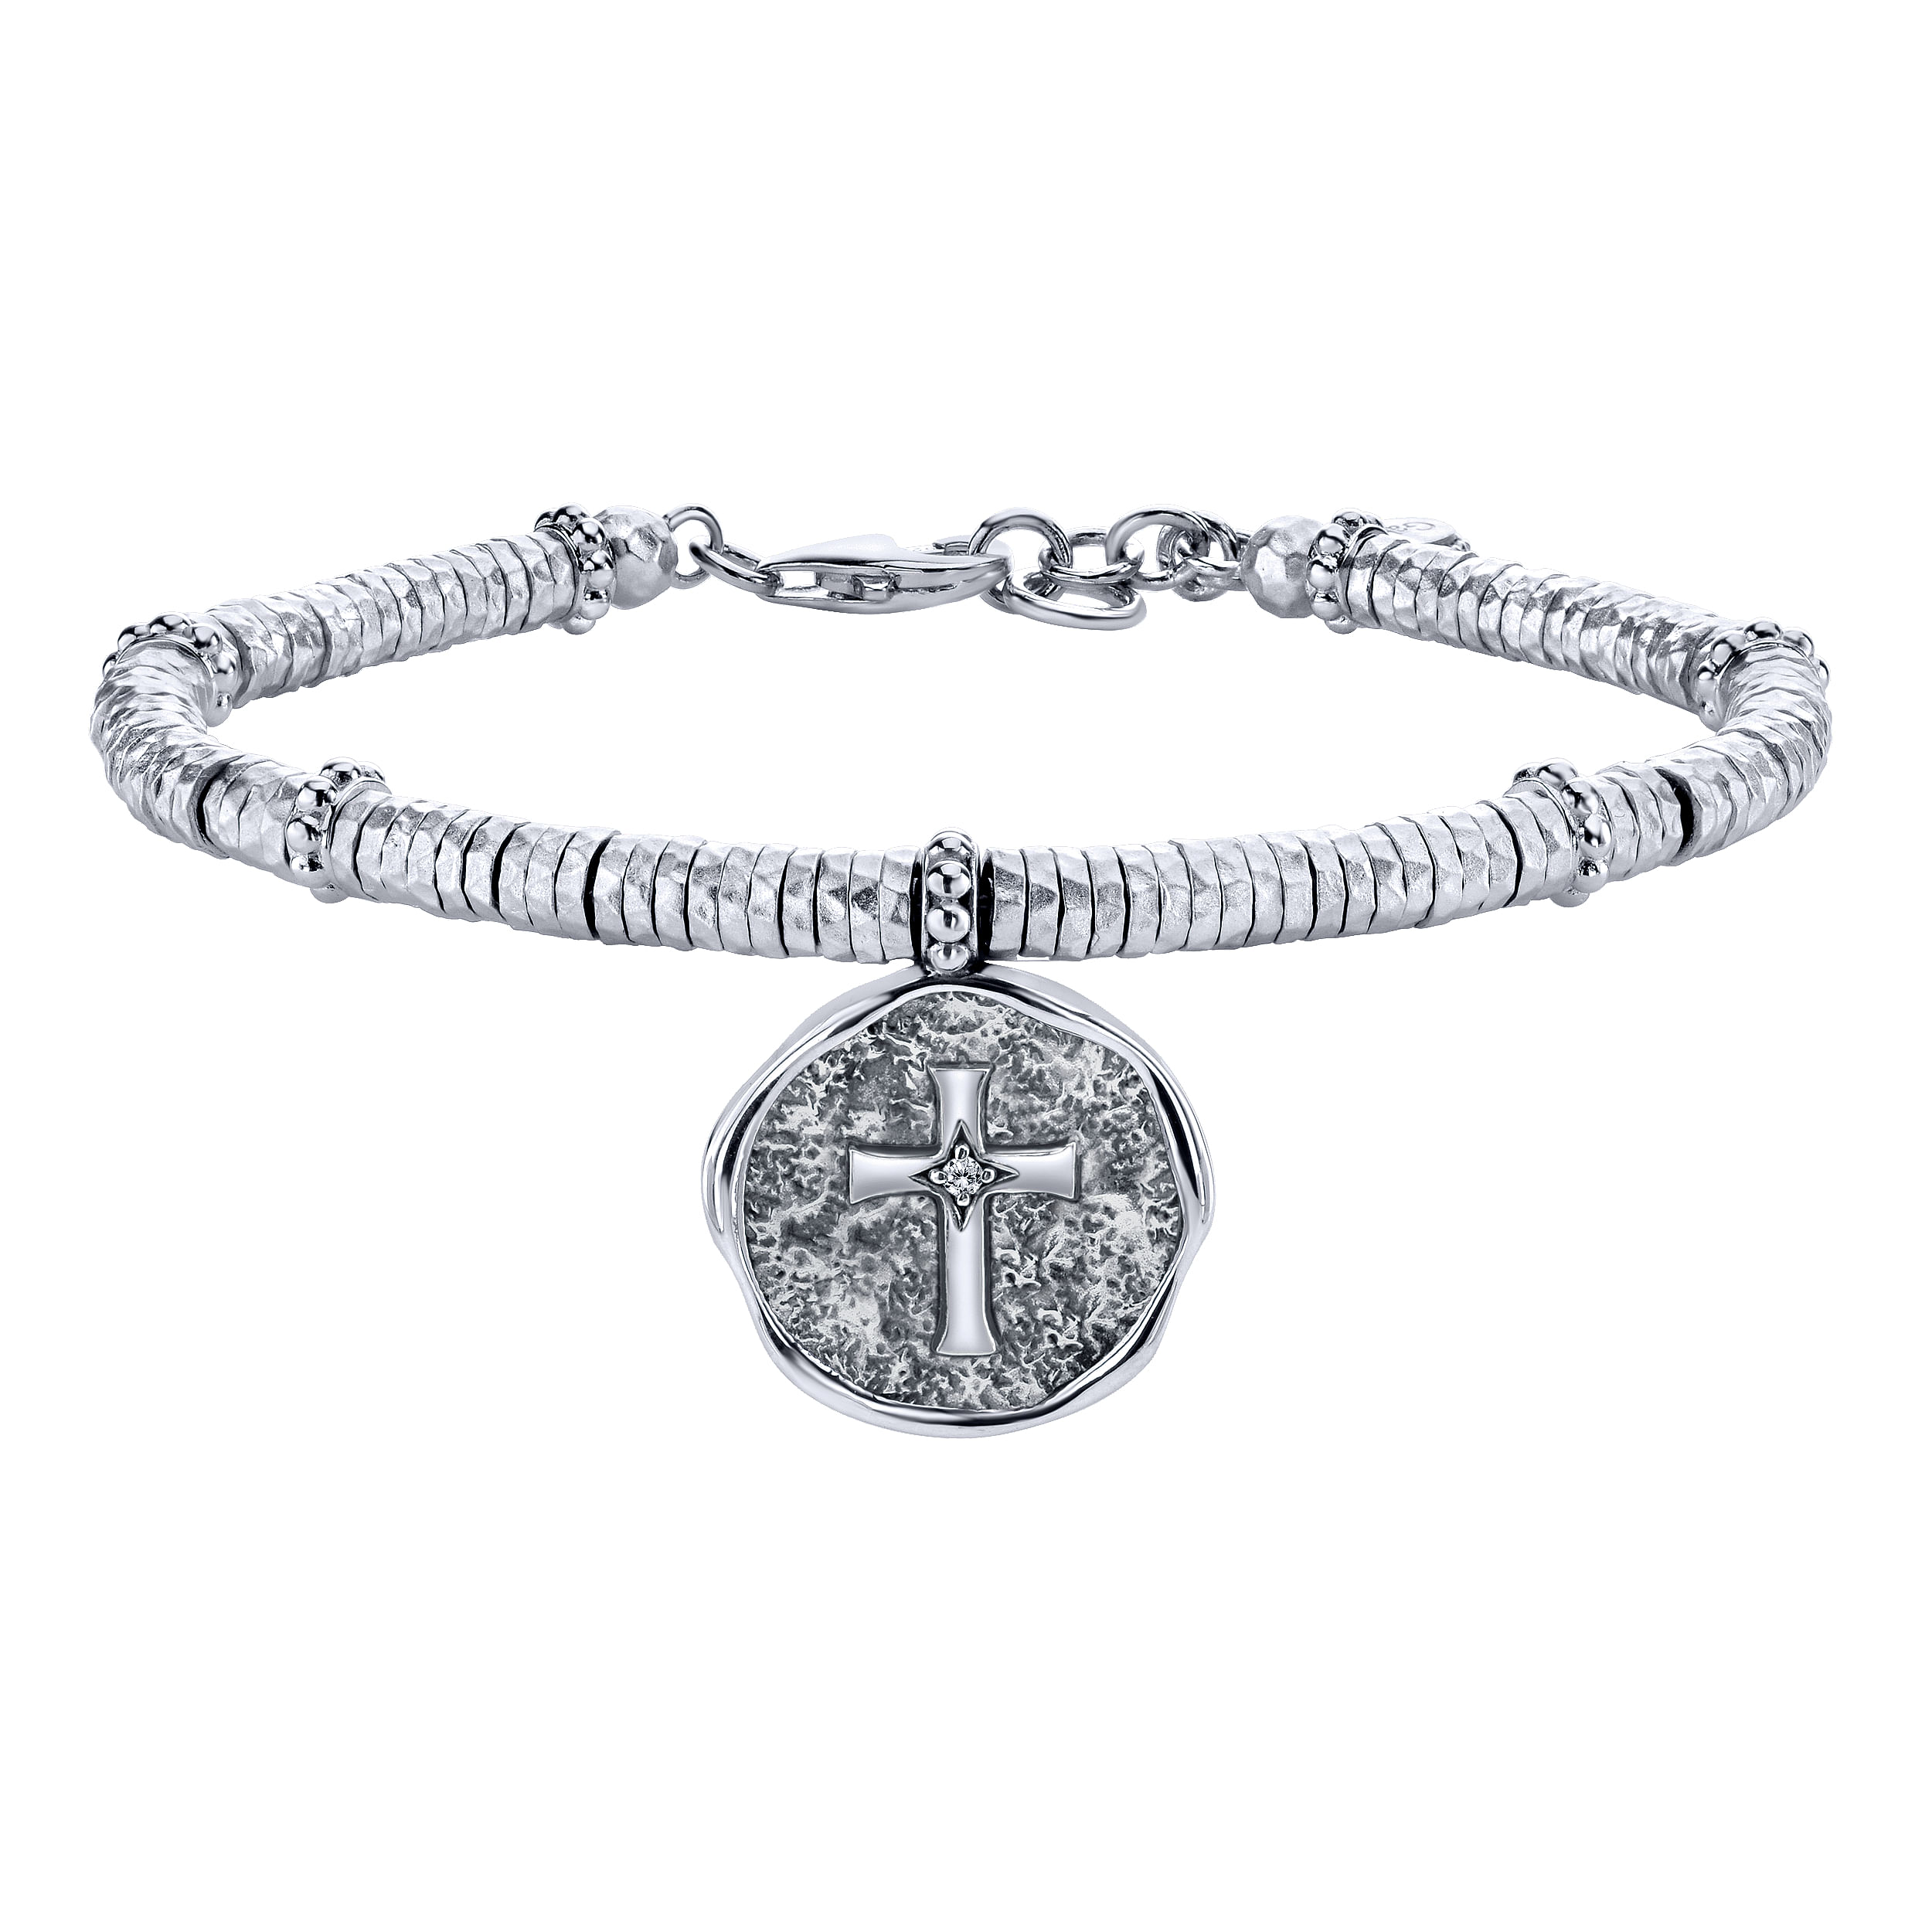 Stainless Steel and 925 Sterling Silver Cross Charm Bracelet with White Sapphire